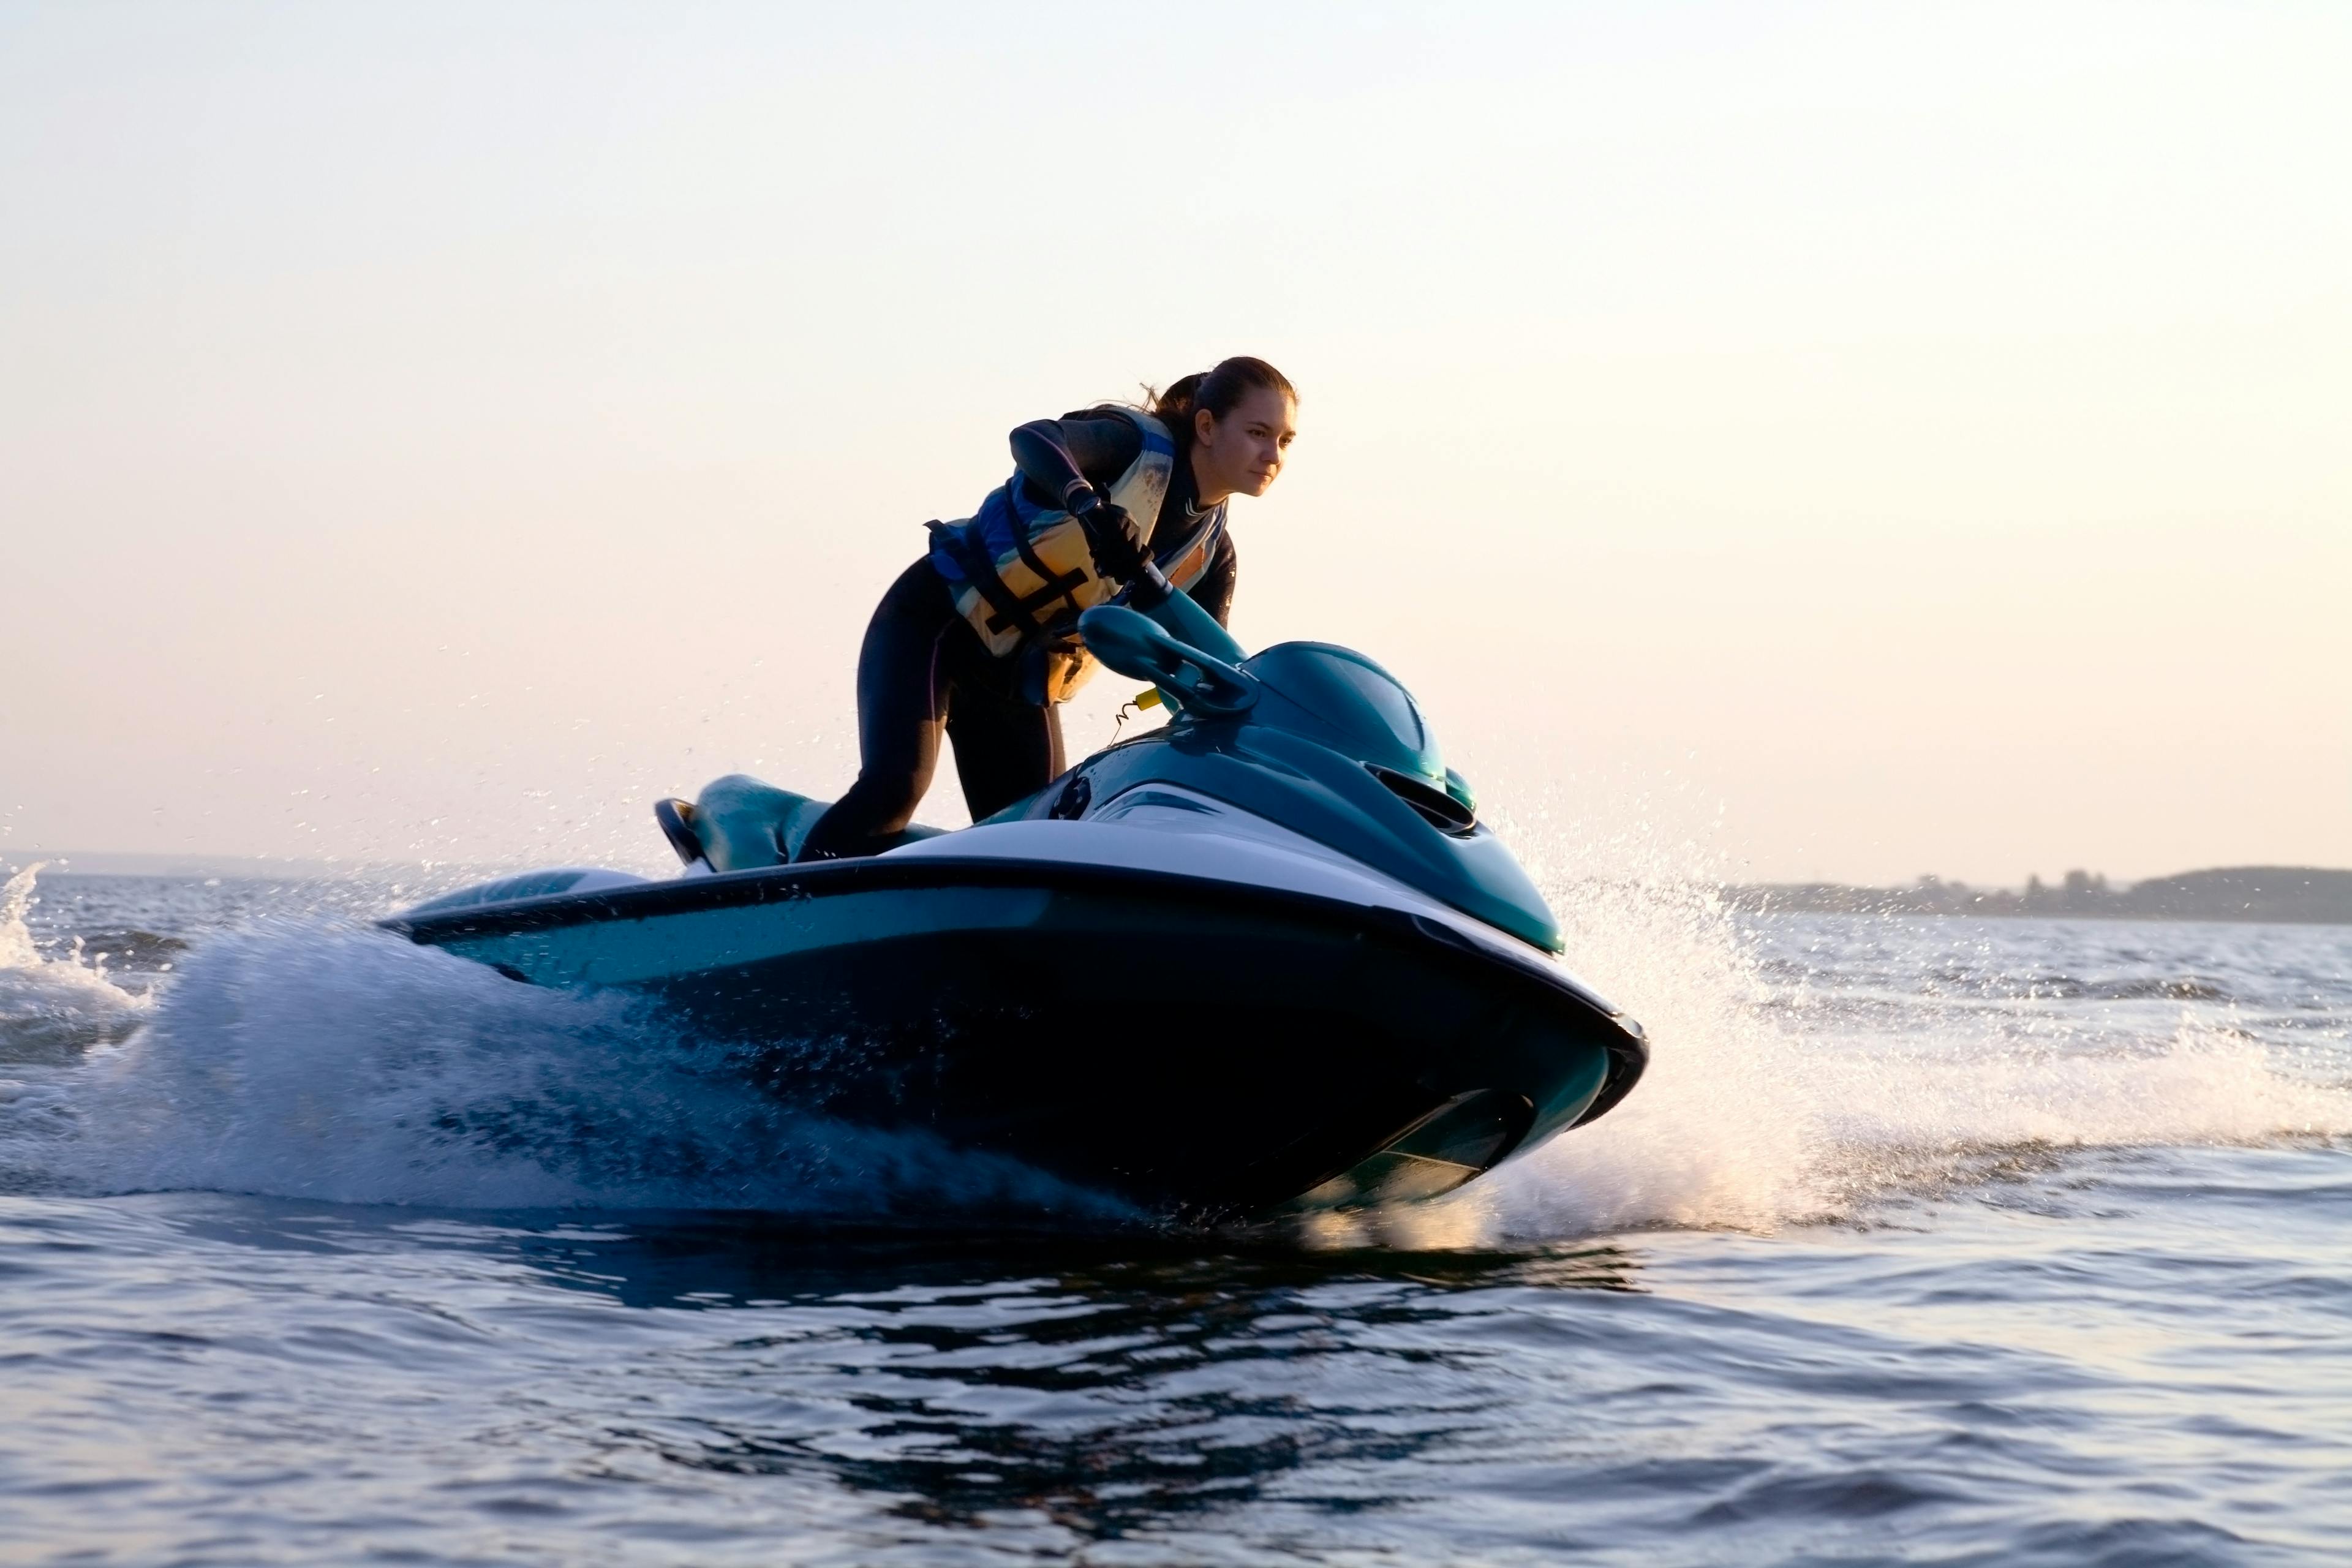 Jetski rentals are available now on Boaters List!